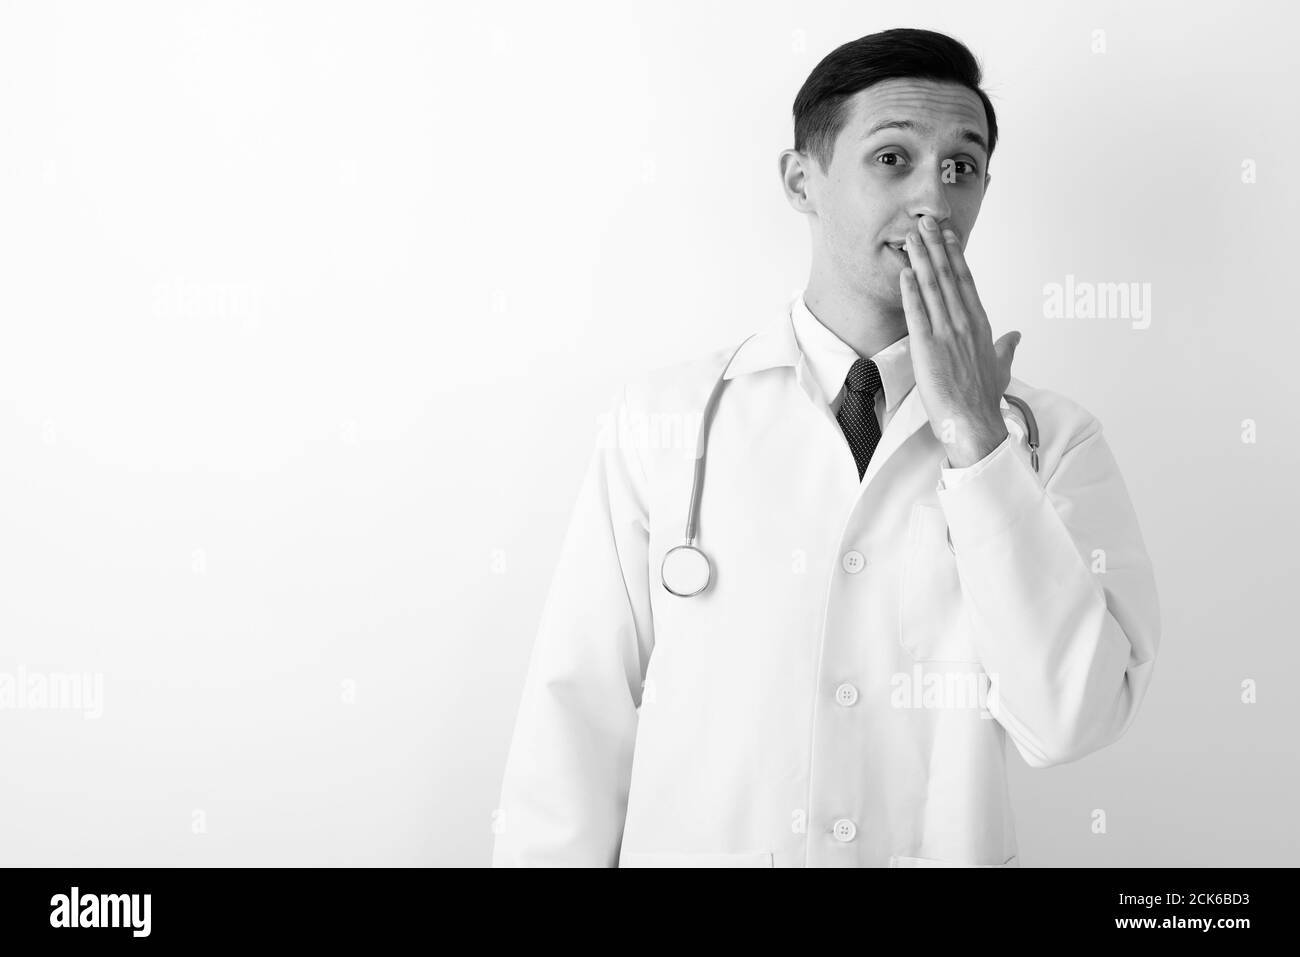 Studio shot of young handsome man doctor covering mouth with hand against white background Stock Photo